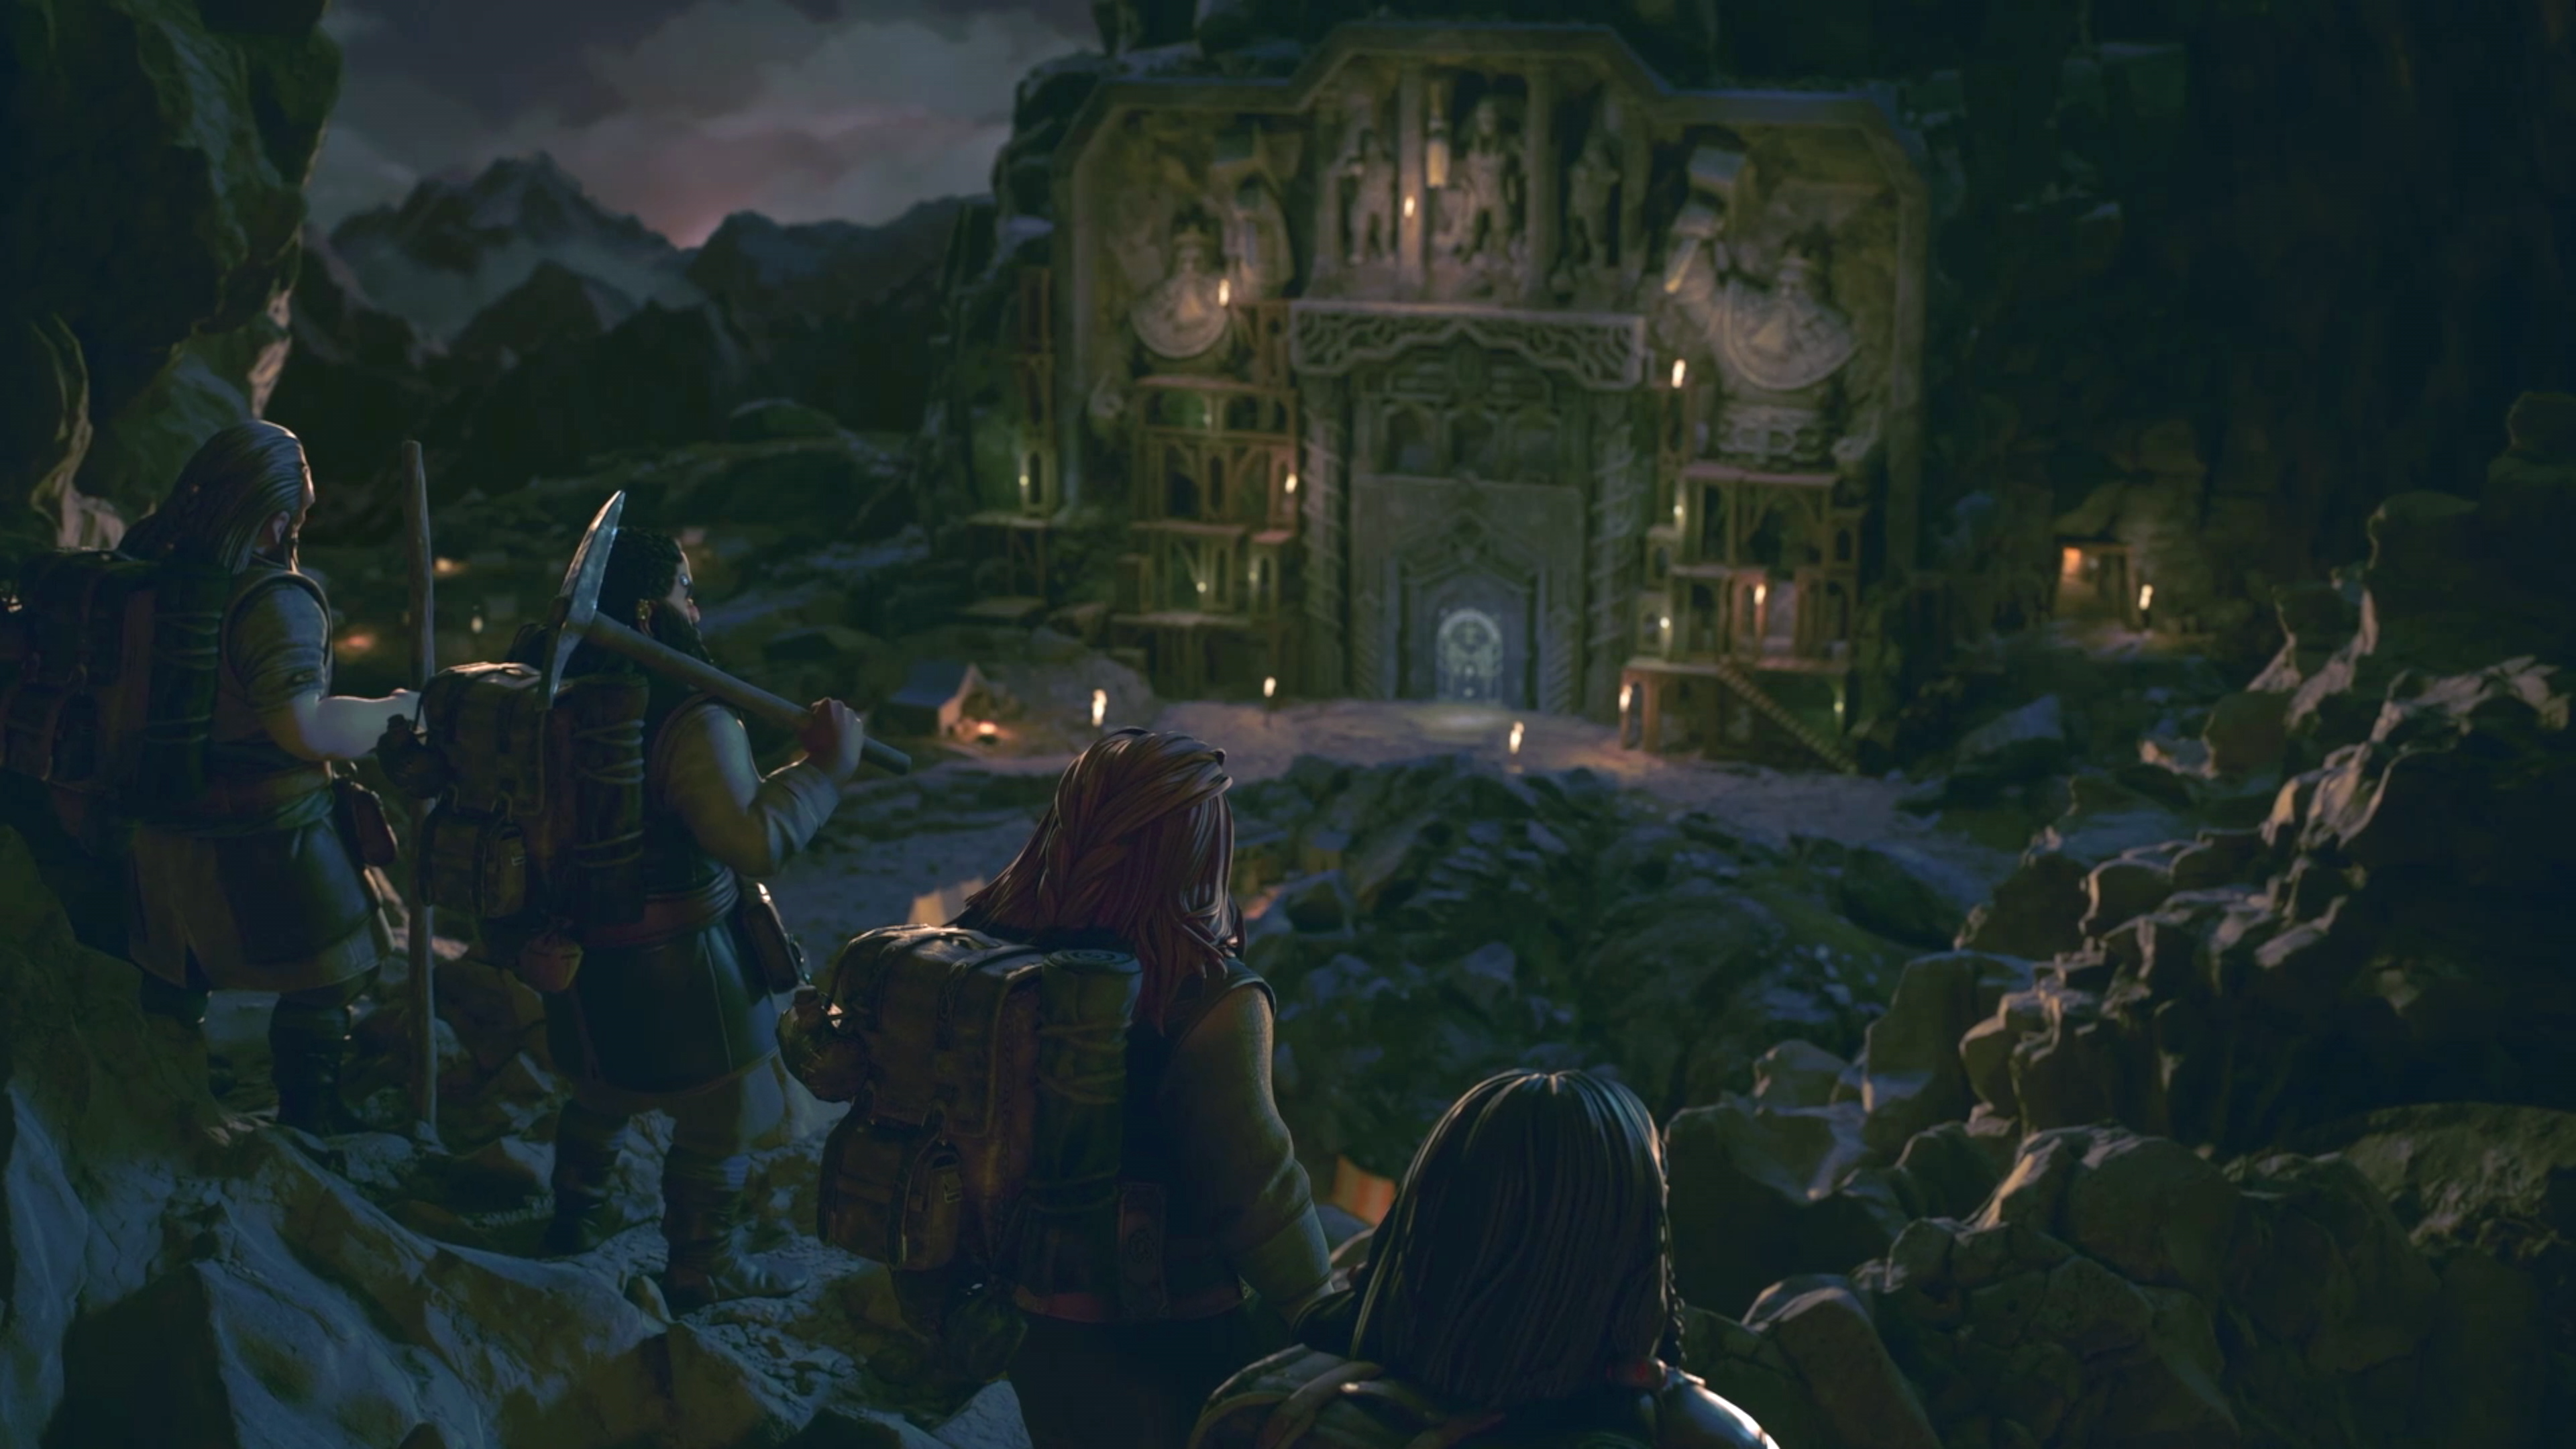 Everything You Need To Know About 'The Lord of the Rings: Return to Moria'  Game & Trailer - Fellowship of Fans